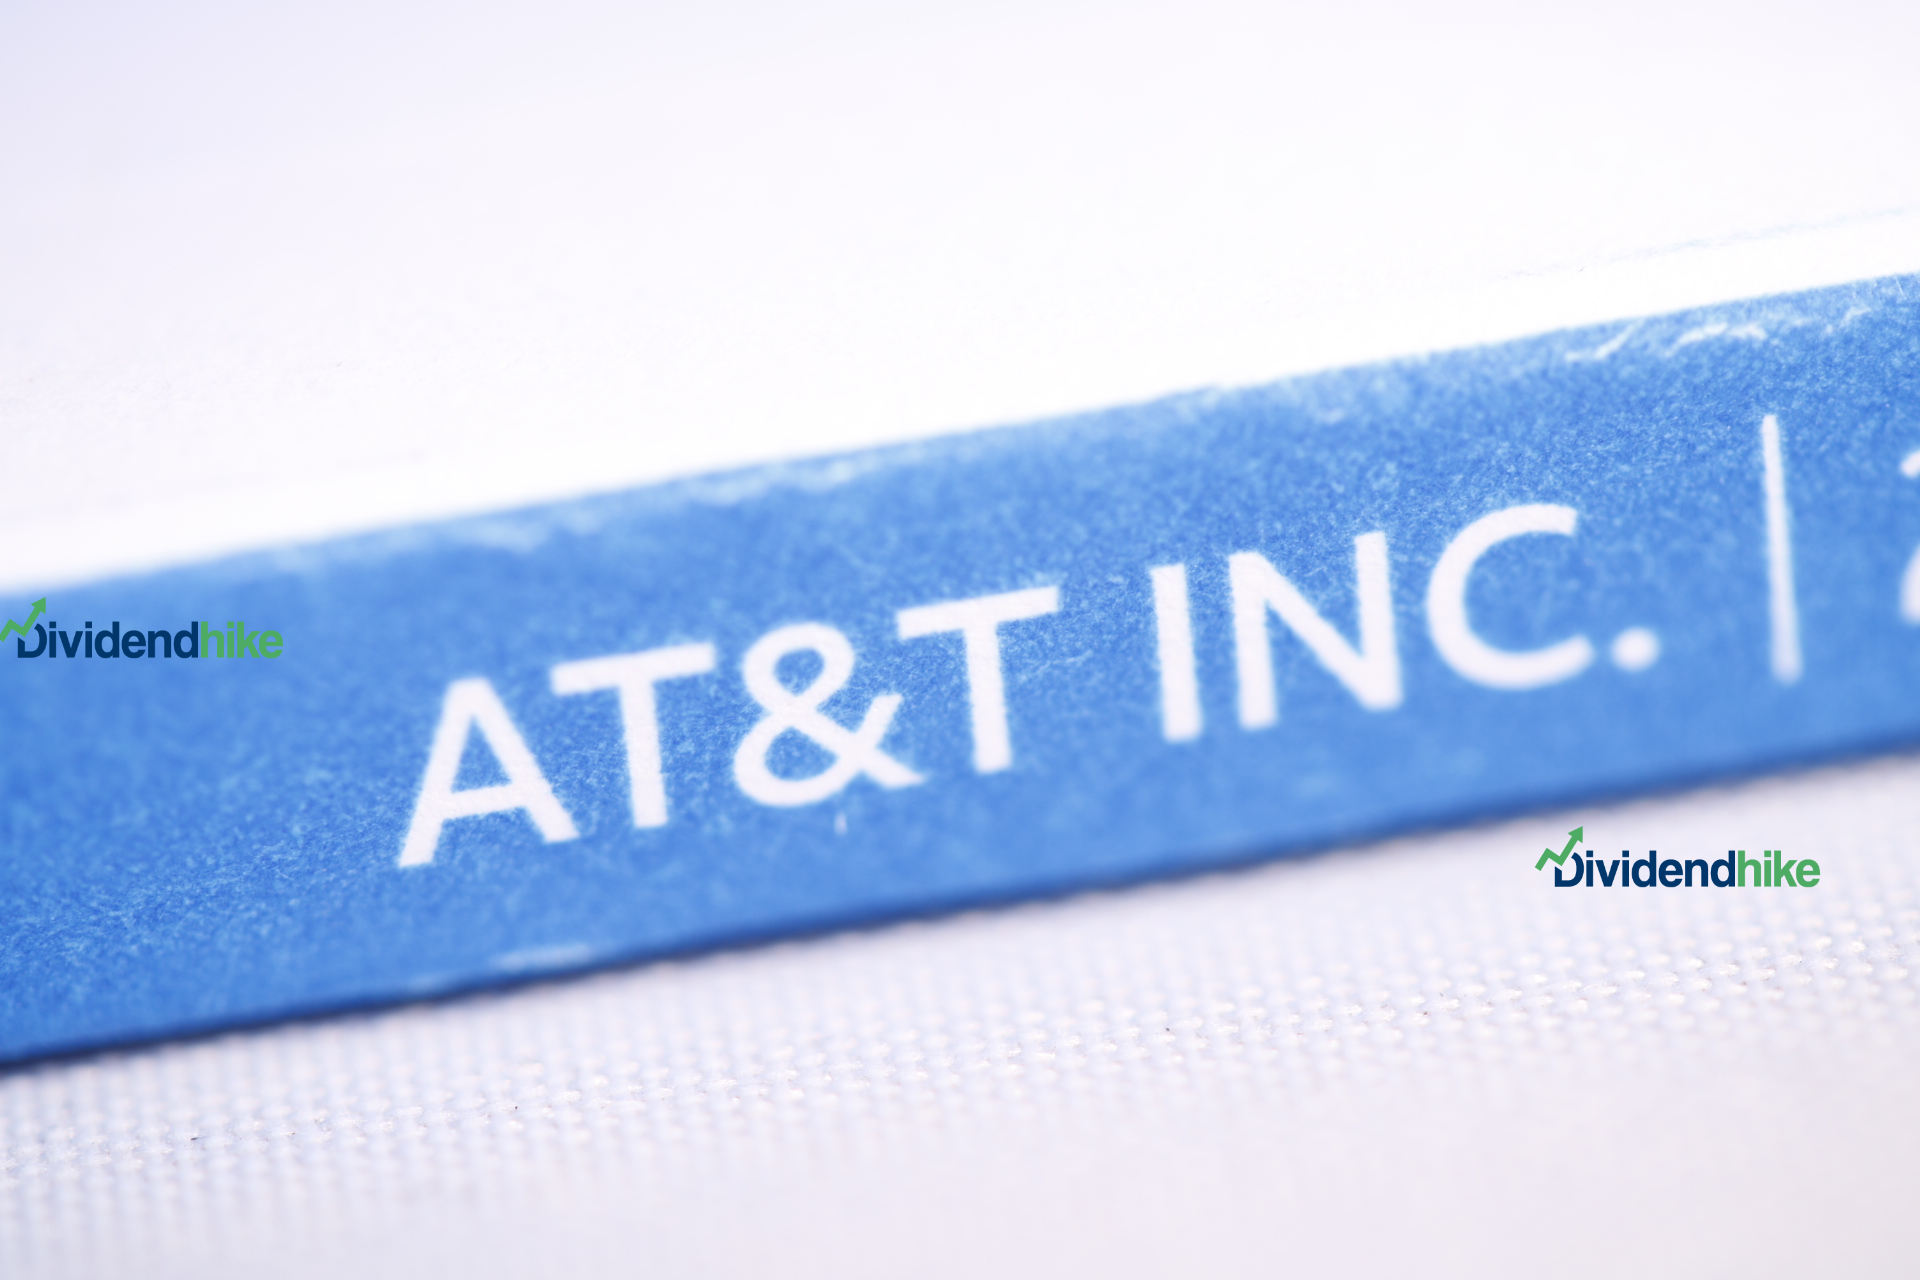 AT&T hikes dividend by 2%